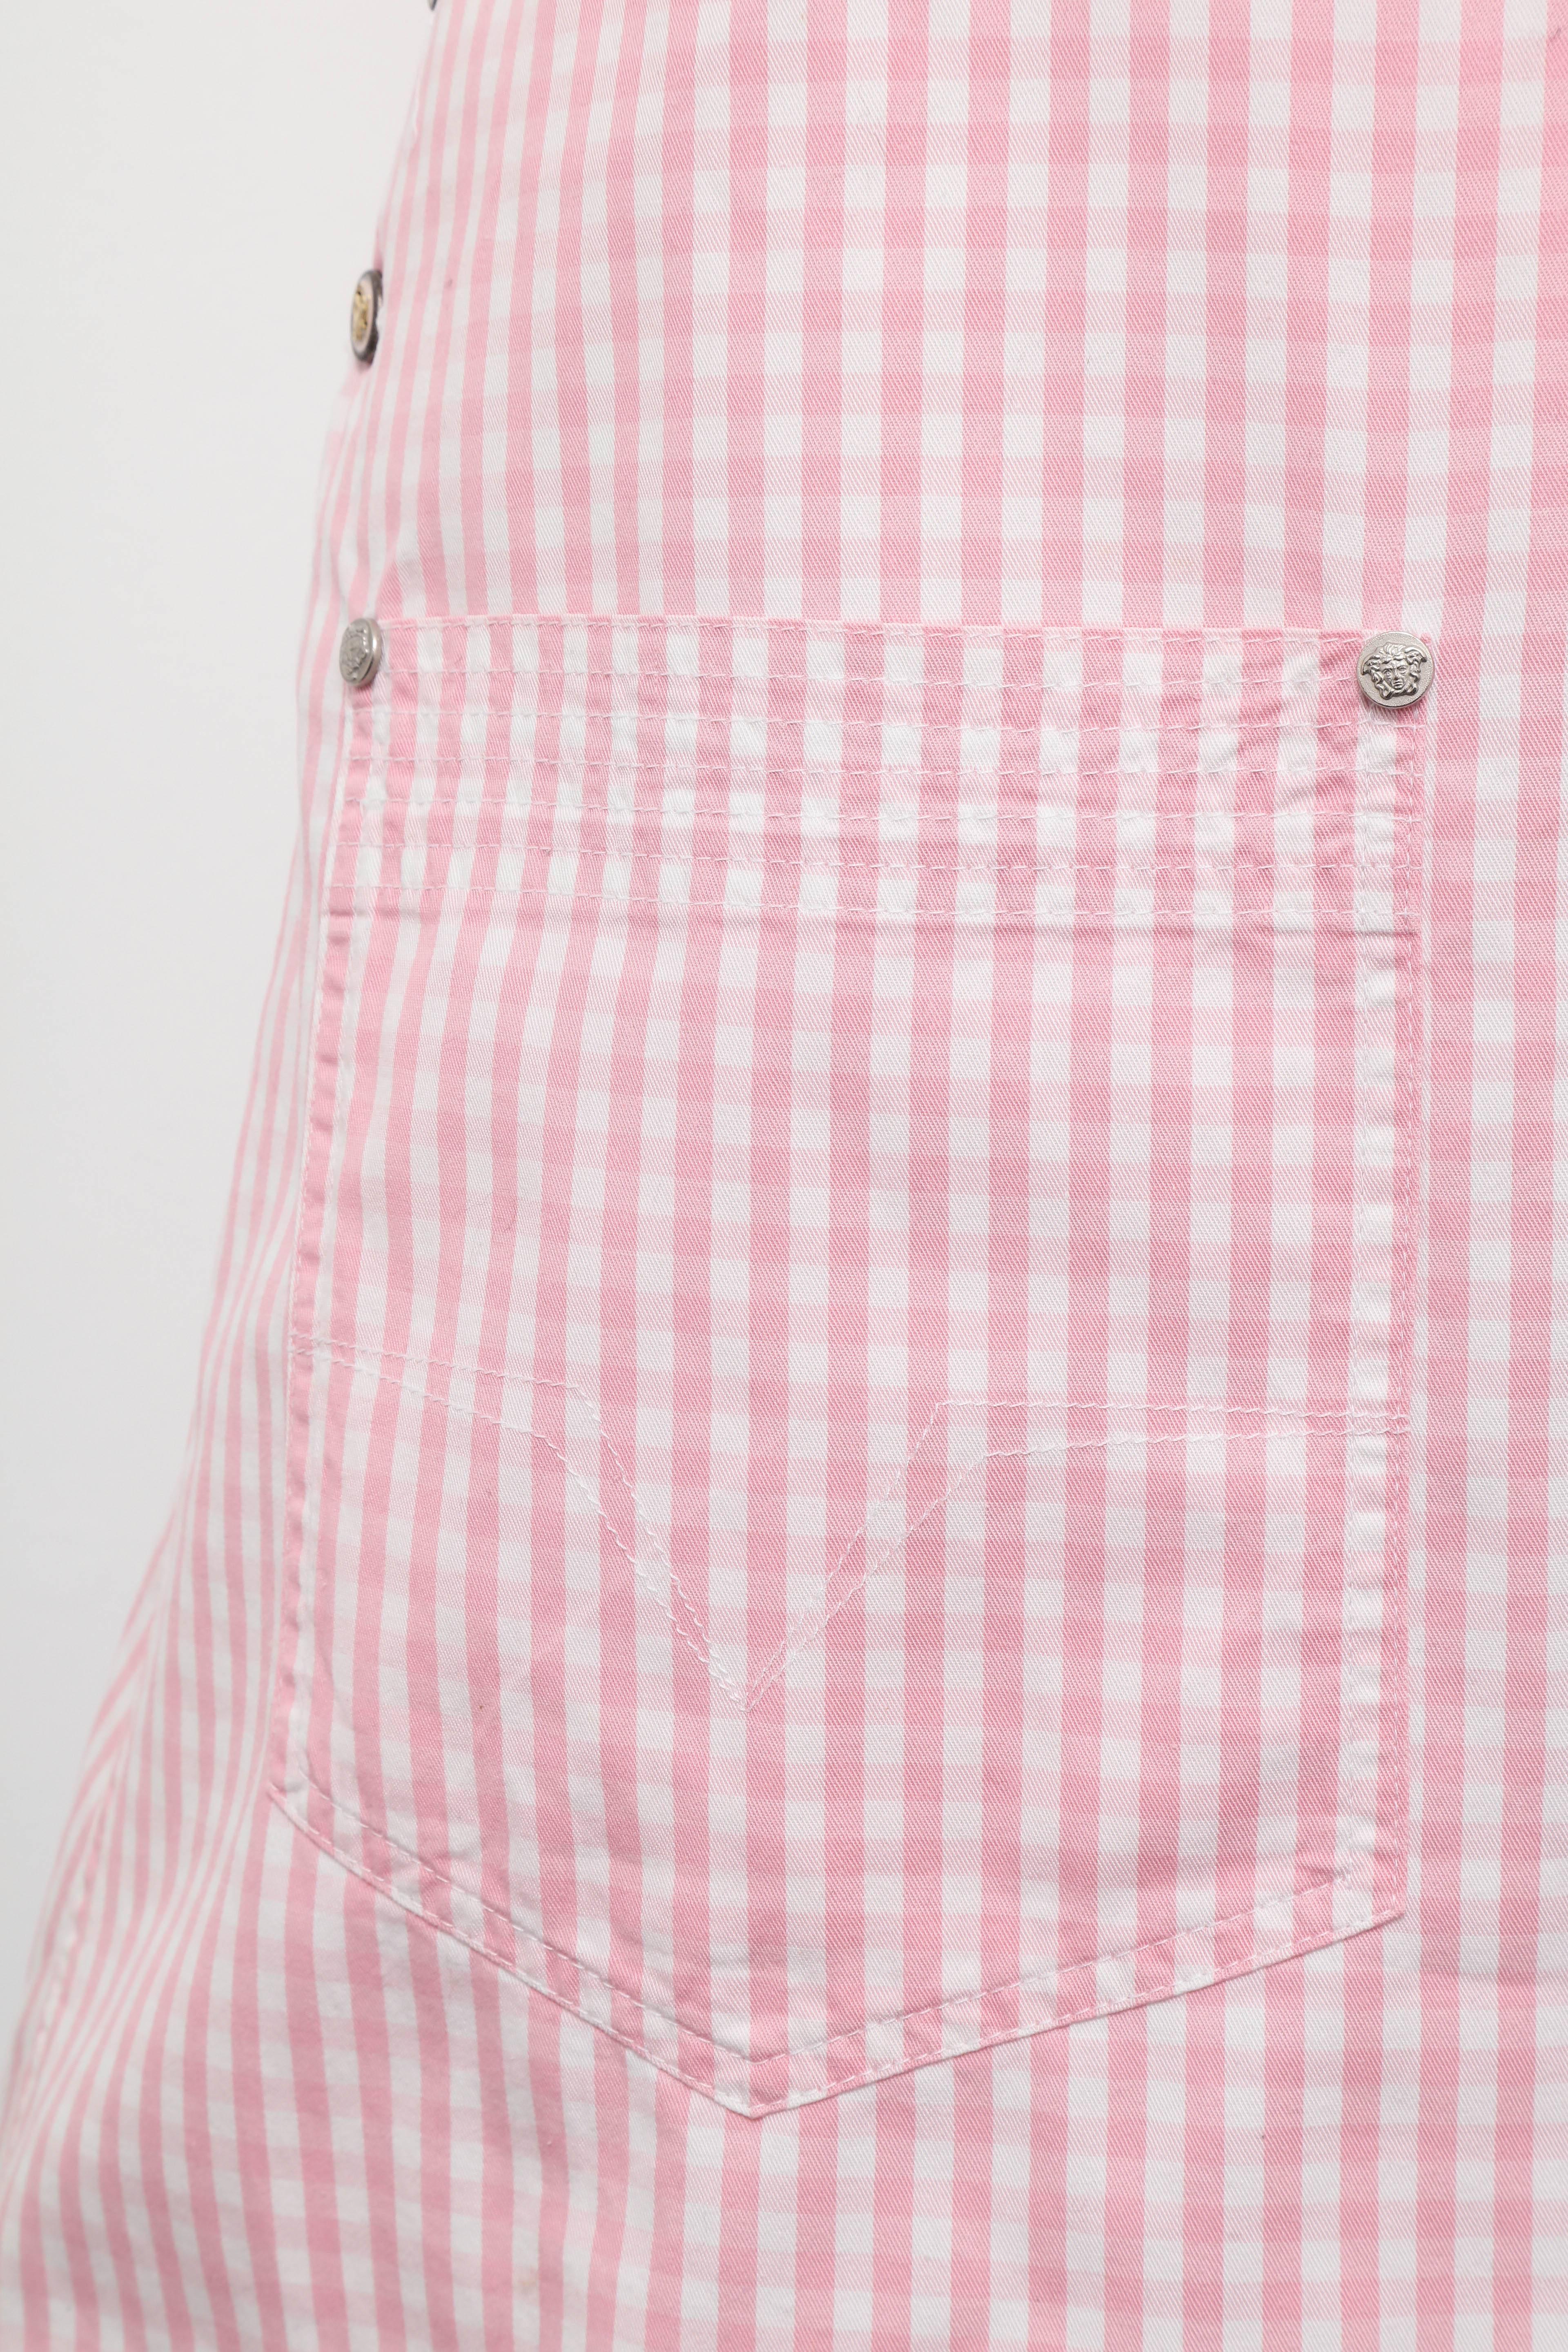 overall dress pink